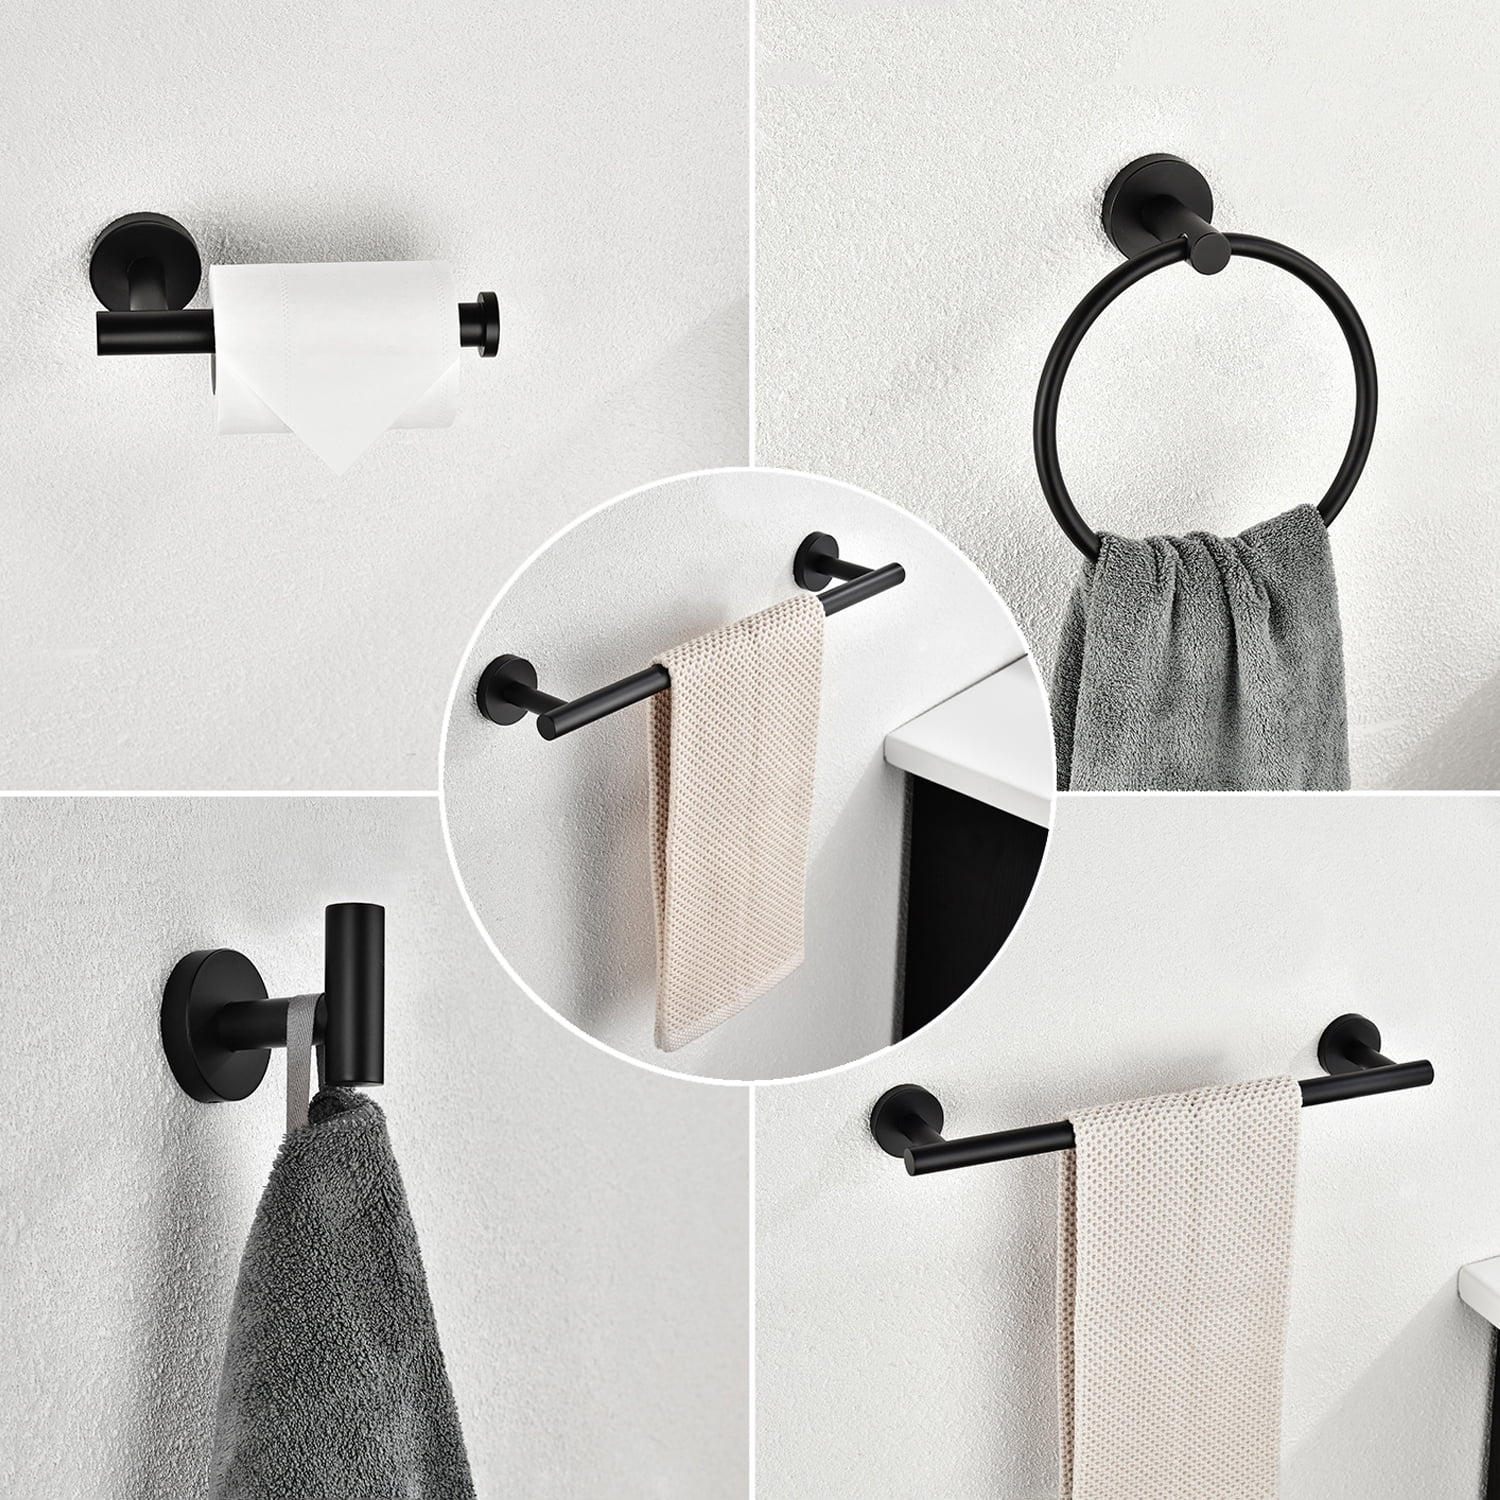 Details about   Bathroom Hand Towel Holder Rail Wall Mounted Brushed Stainless Steel Sleek 